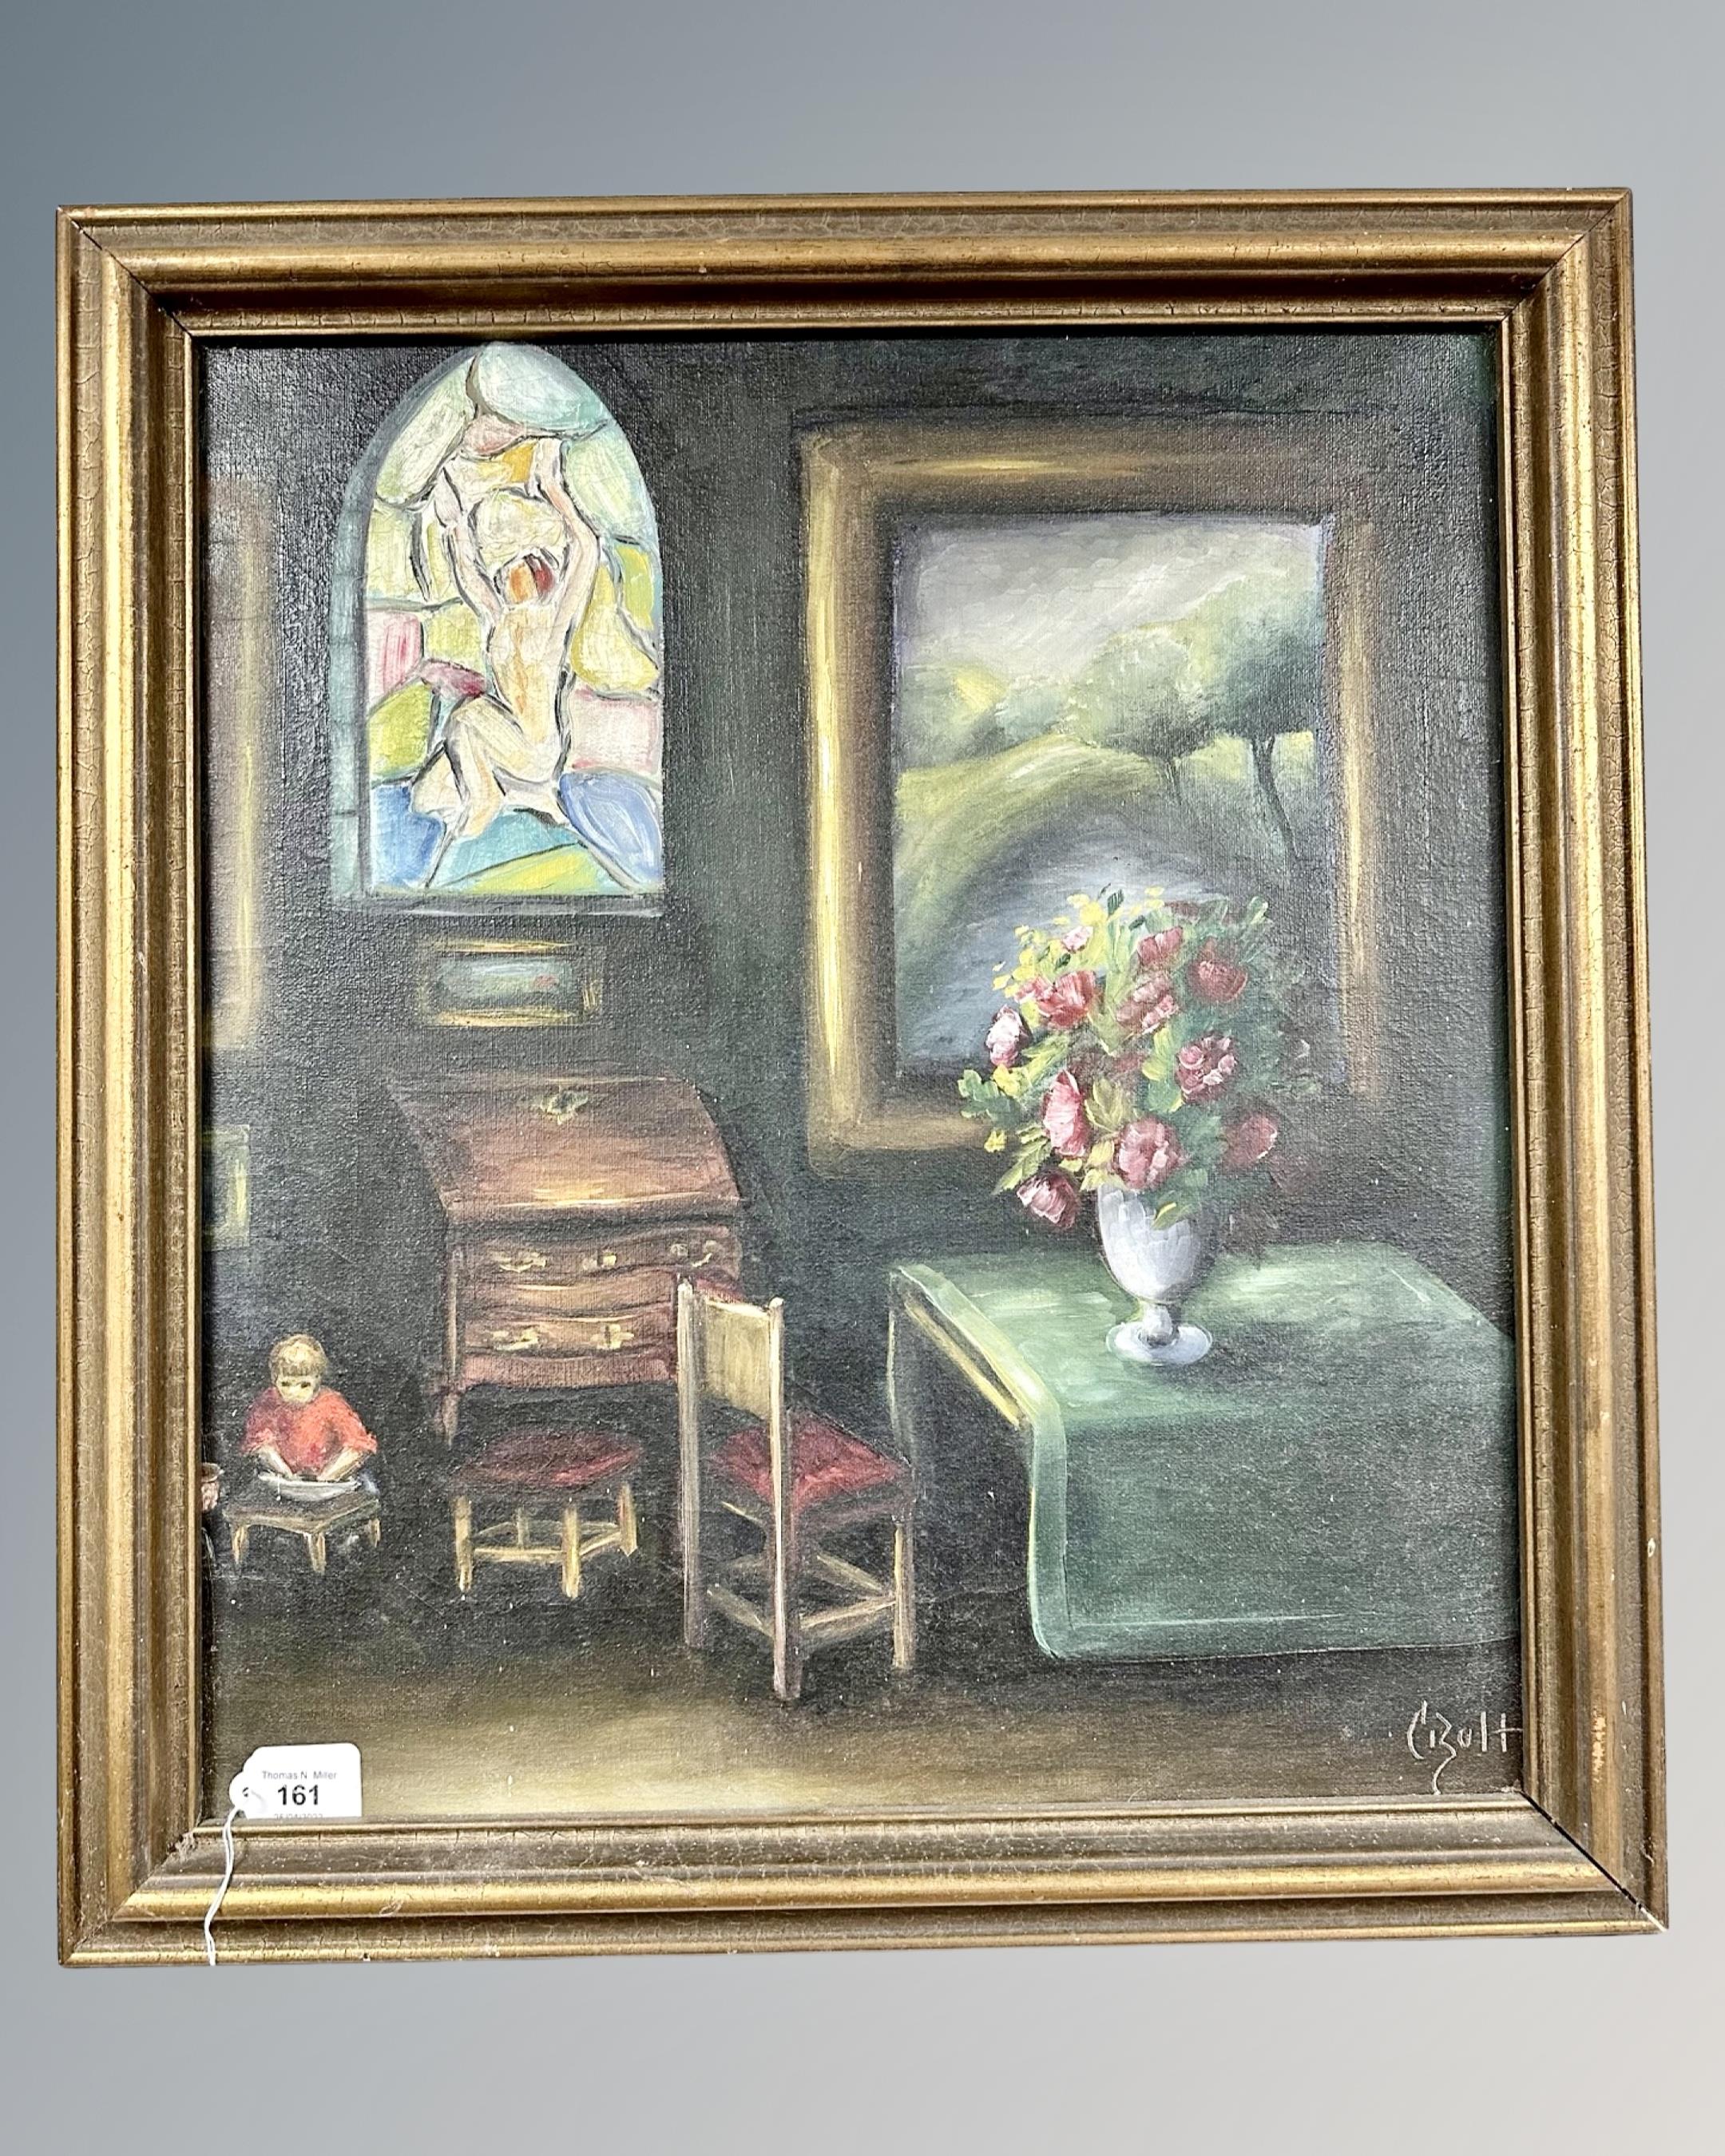 Crult : Interior setting with stained glass window, oil on canvas, 52 cm x 47 cm.